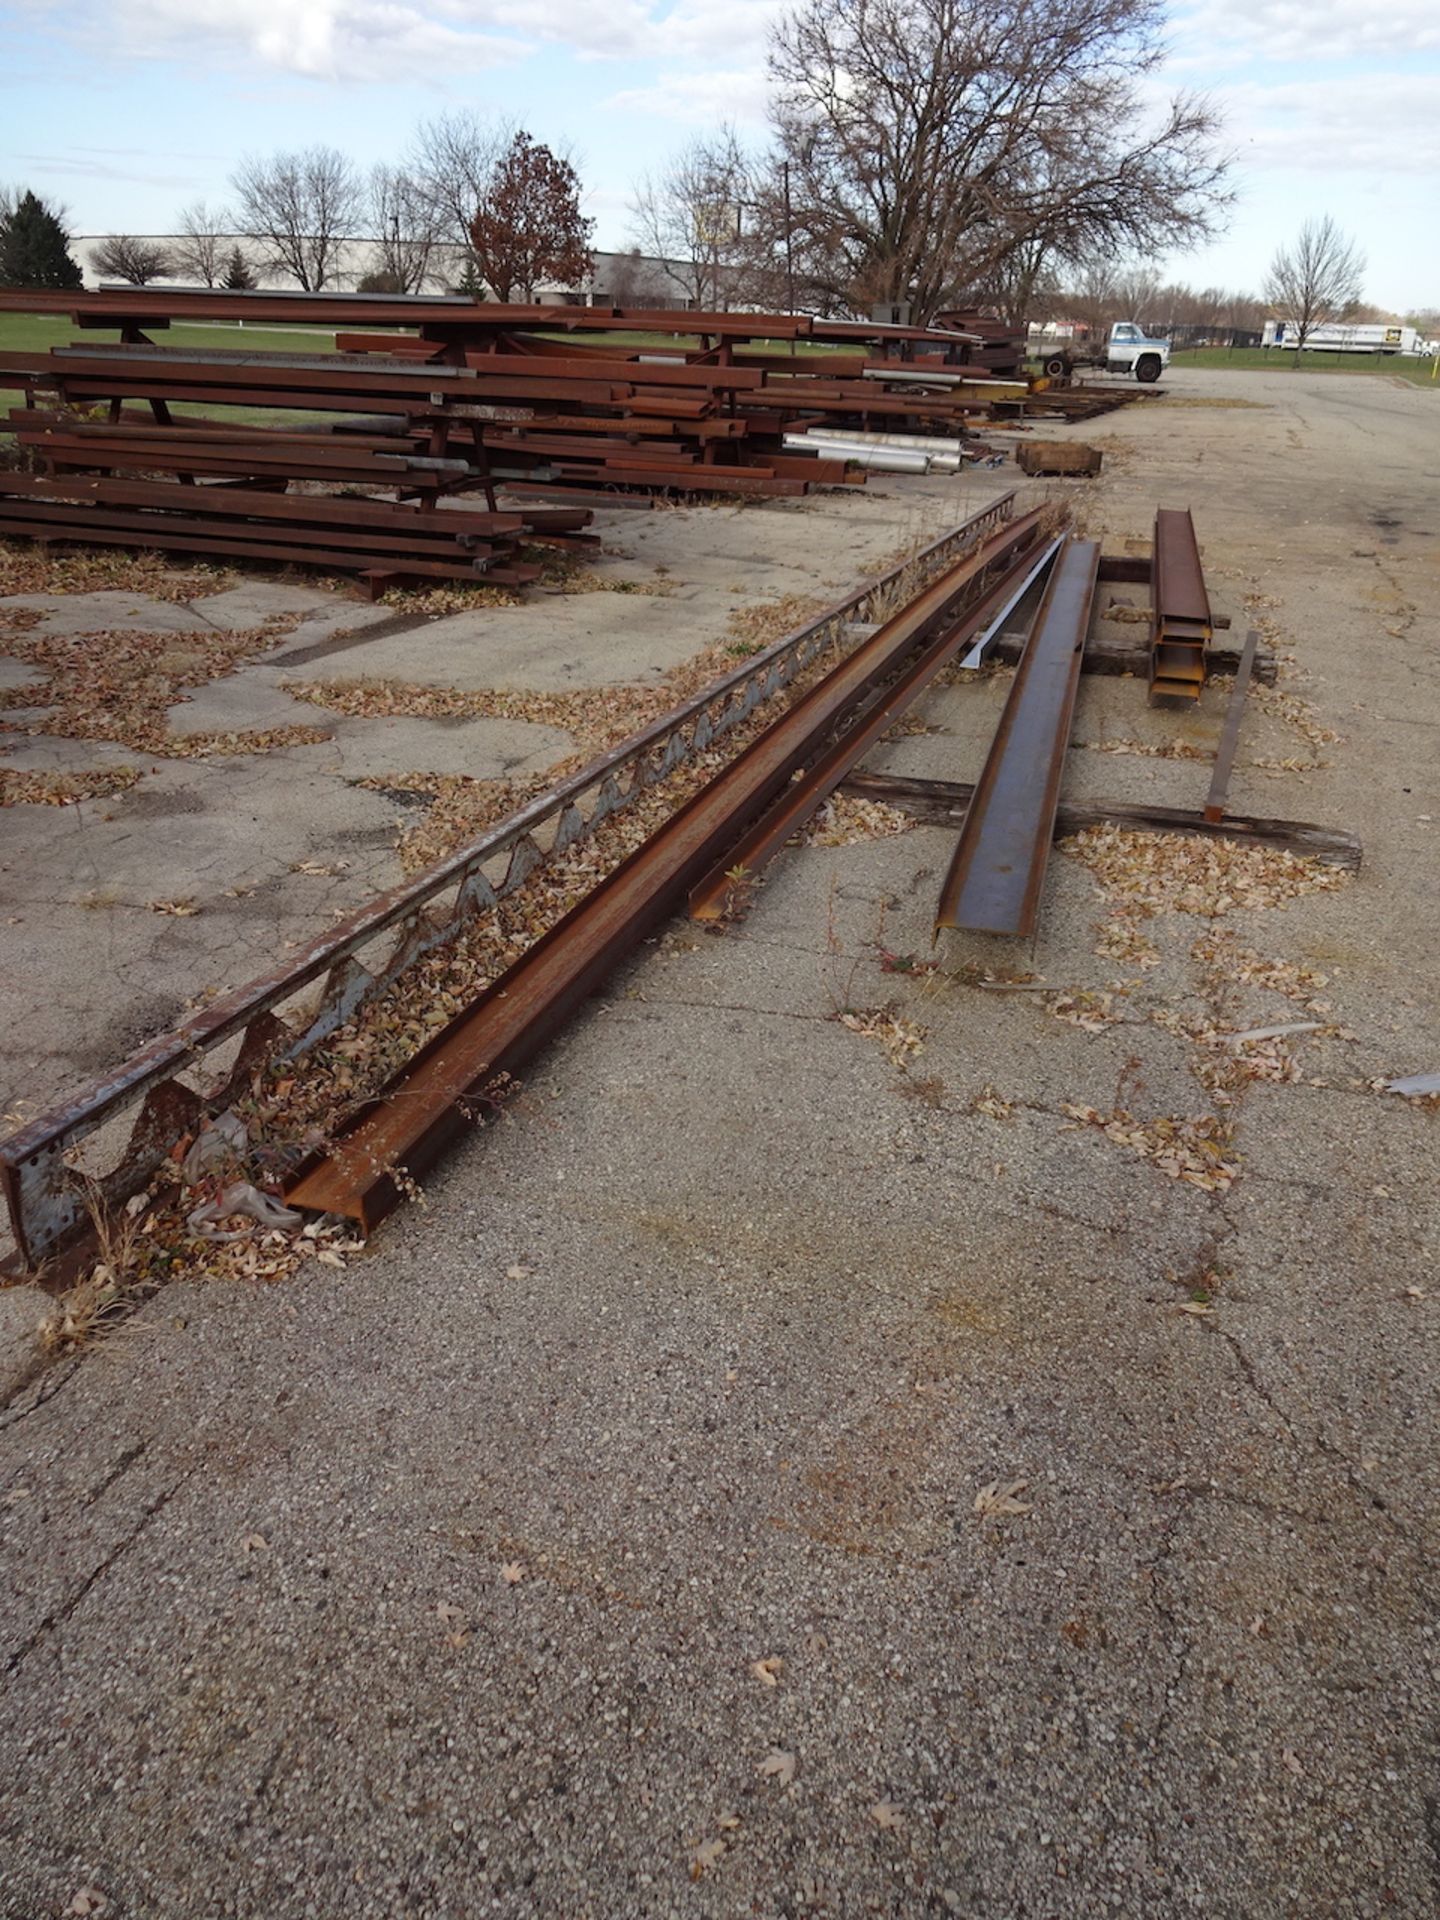 LOT: All Scrap on Southwest Side of Building including I-Beam, Tubing, Square, Channel, Steel Racks, - Image 8 of 24